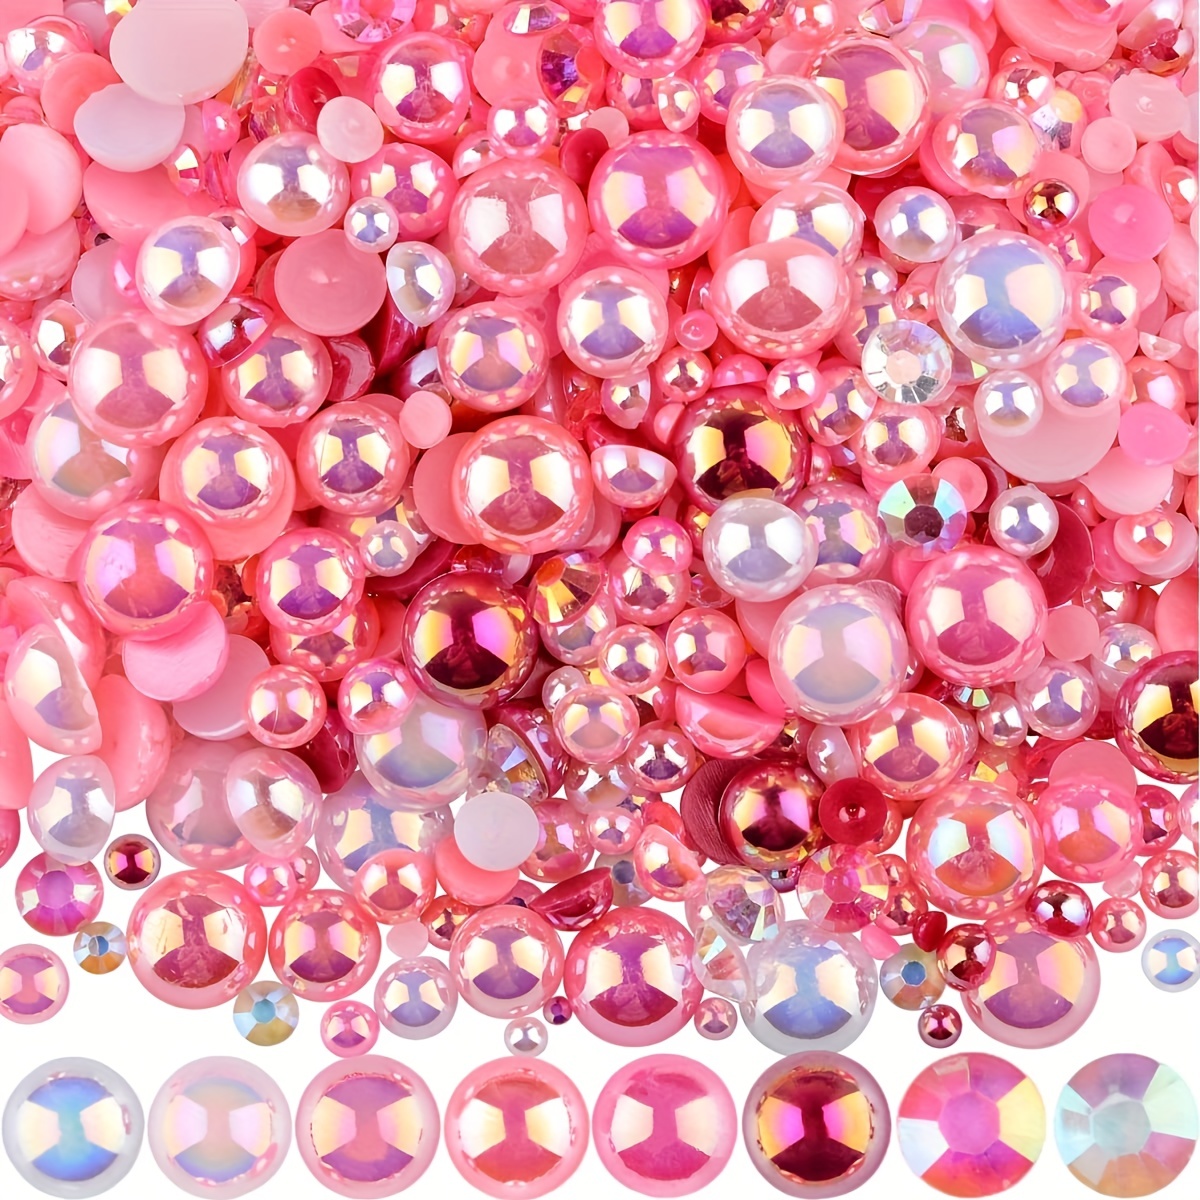 Candy Cane Pearl Mix, Flatback Pearls and Rhinestone Mix, Sizes Range  3MM-10MM, Flatback Jelly Resin, Faux Pearls Mix